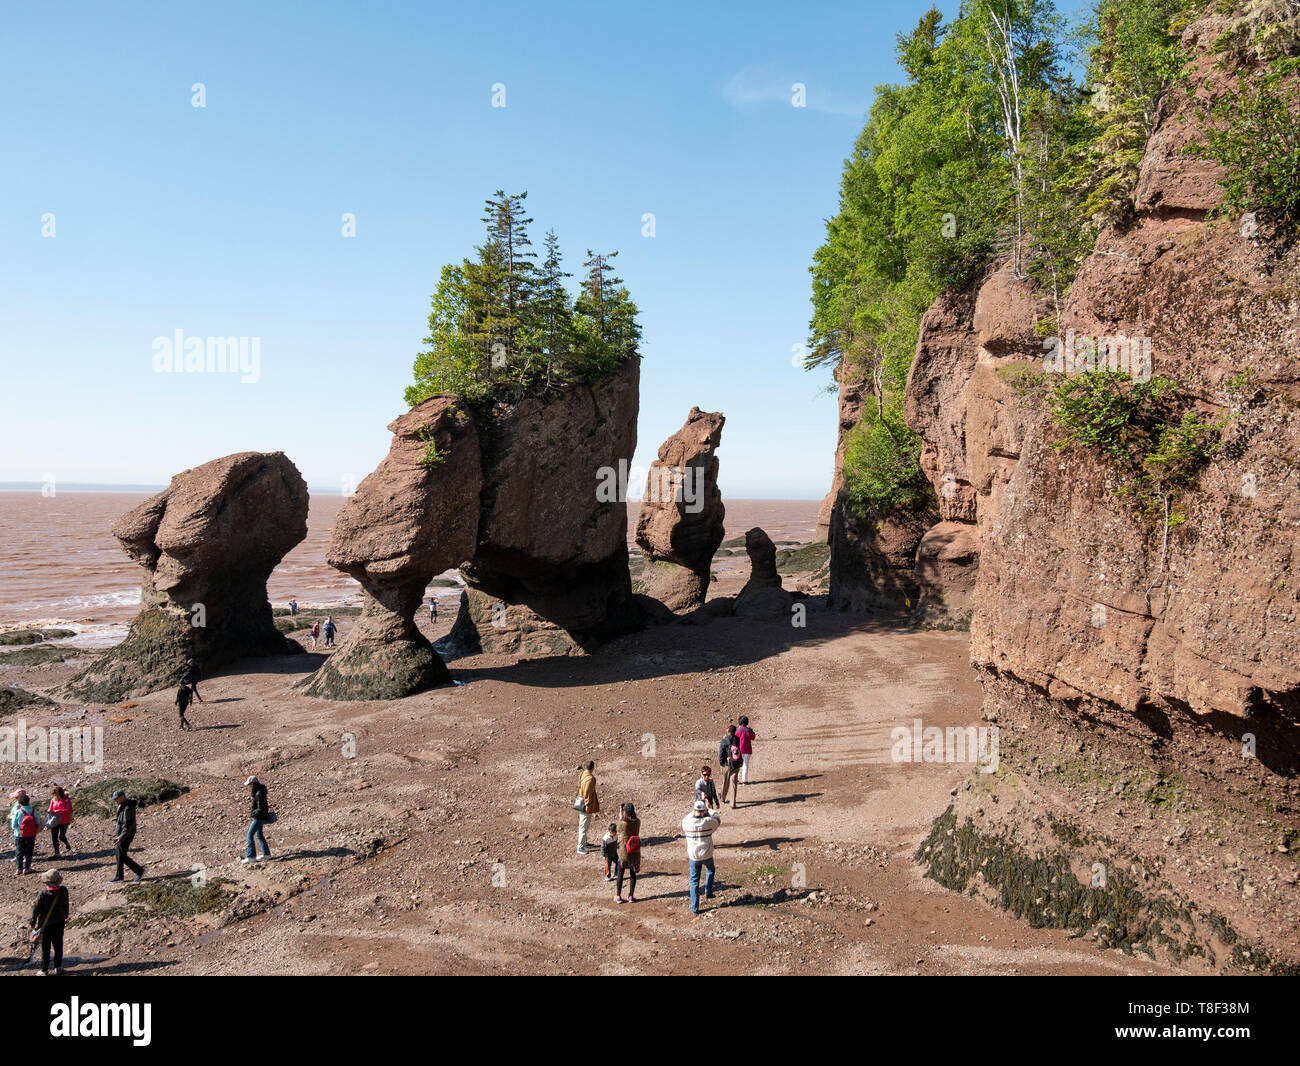 The Hopewell Rocks is one of New Brunswick’s top attractions. Walk on the ocean floor in the shadows of the majestic flower-pot rocks, unique formatio Stock Photo